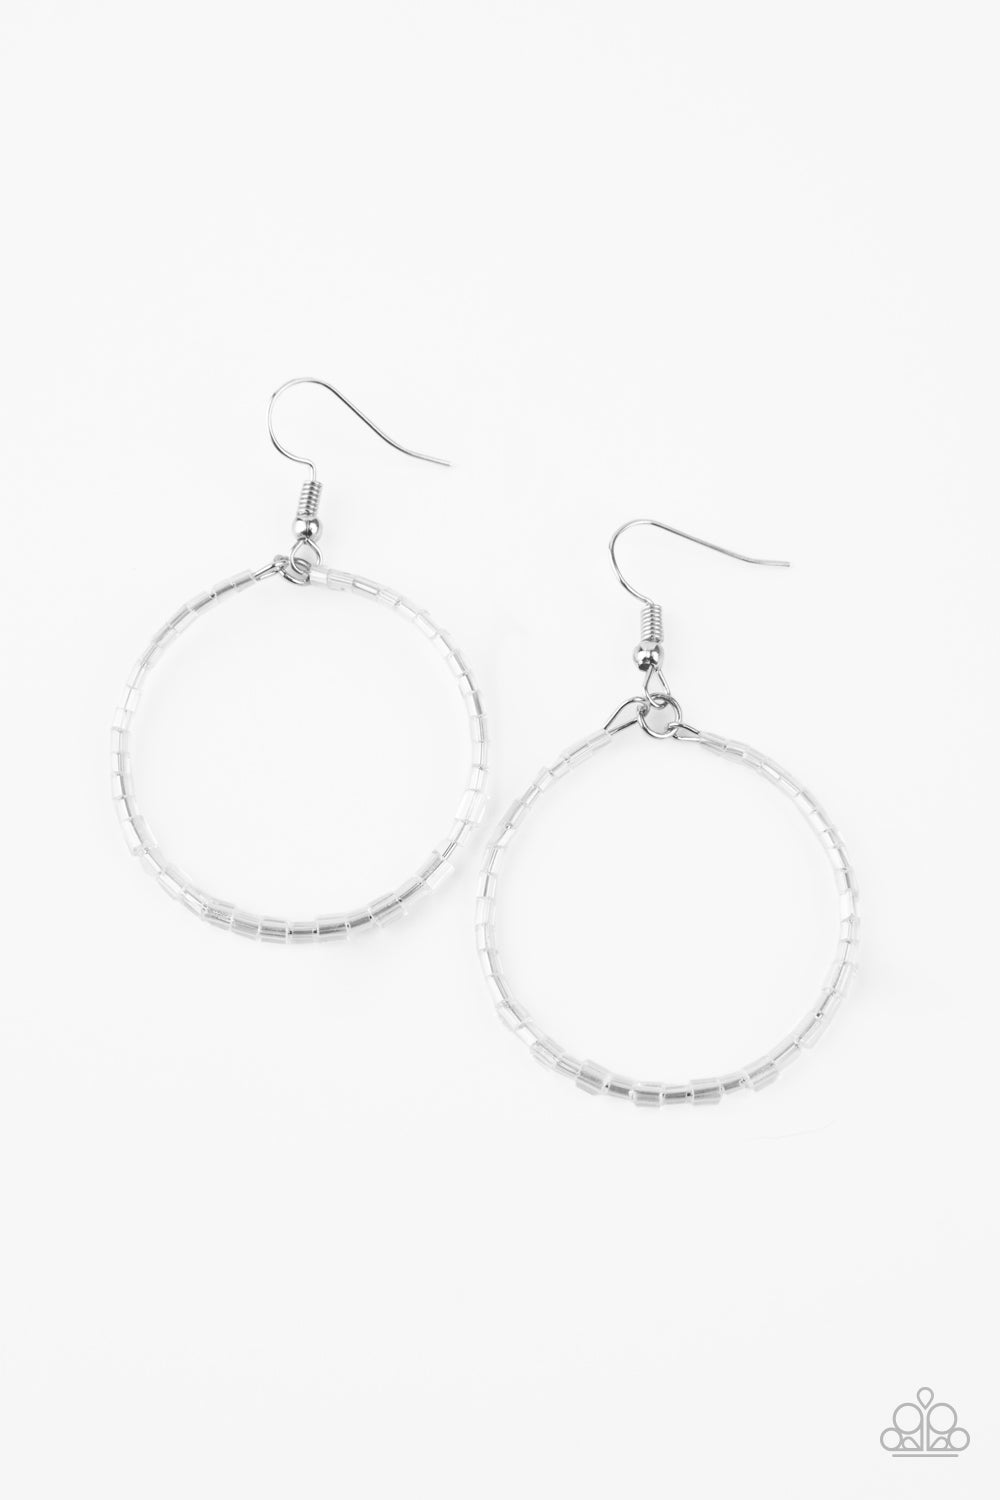 Paparazzi Accessories - Colorfully Curvy - White Iridescent Earrings - Alies Bling Bar